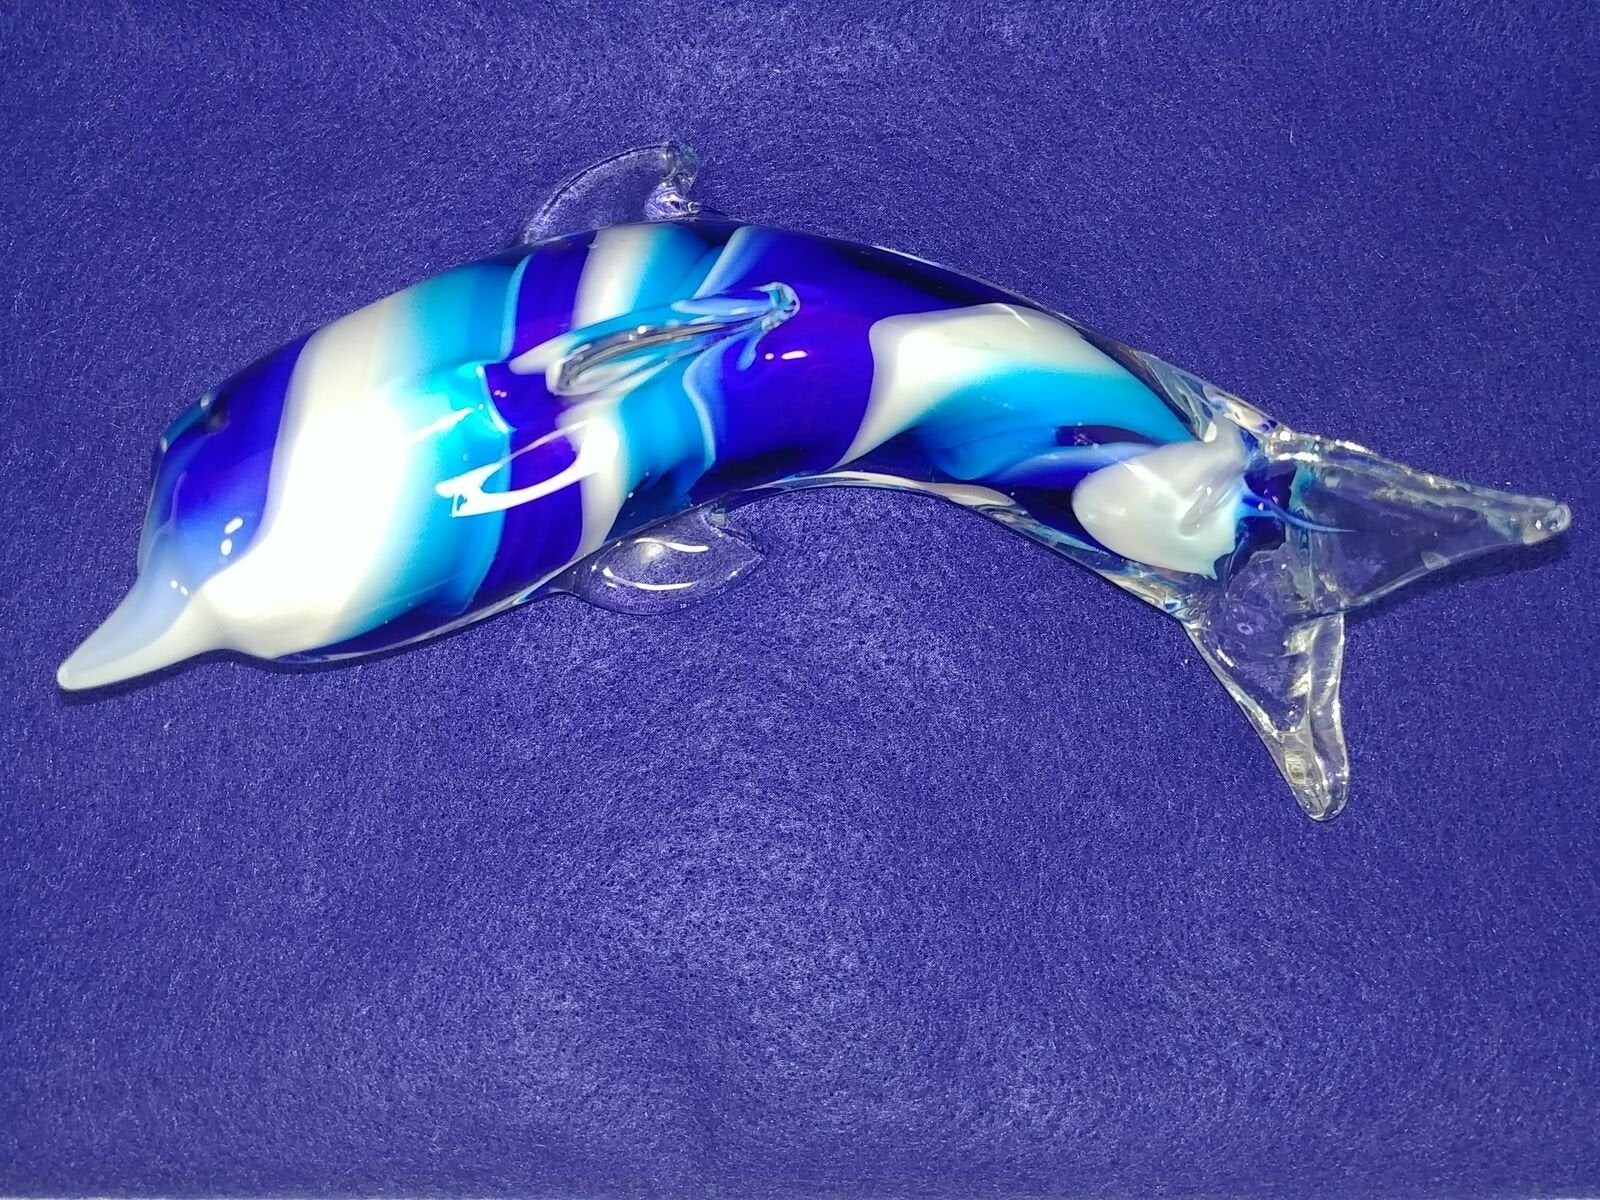 Art Glass Dolphin Paperweight Blue White Hand Made 6"